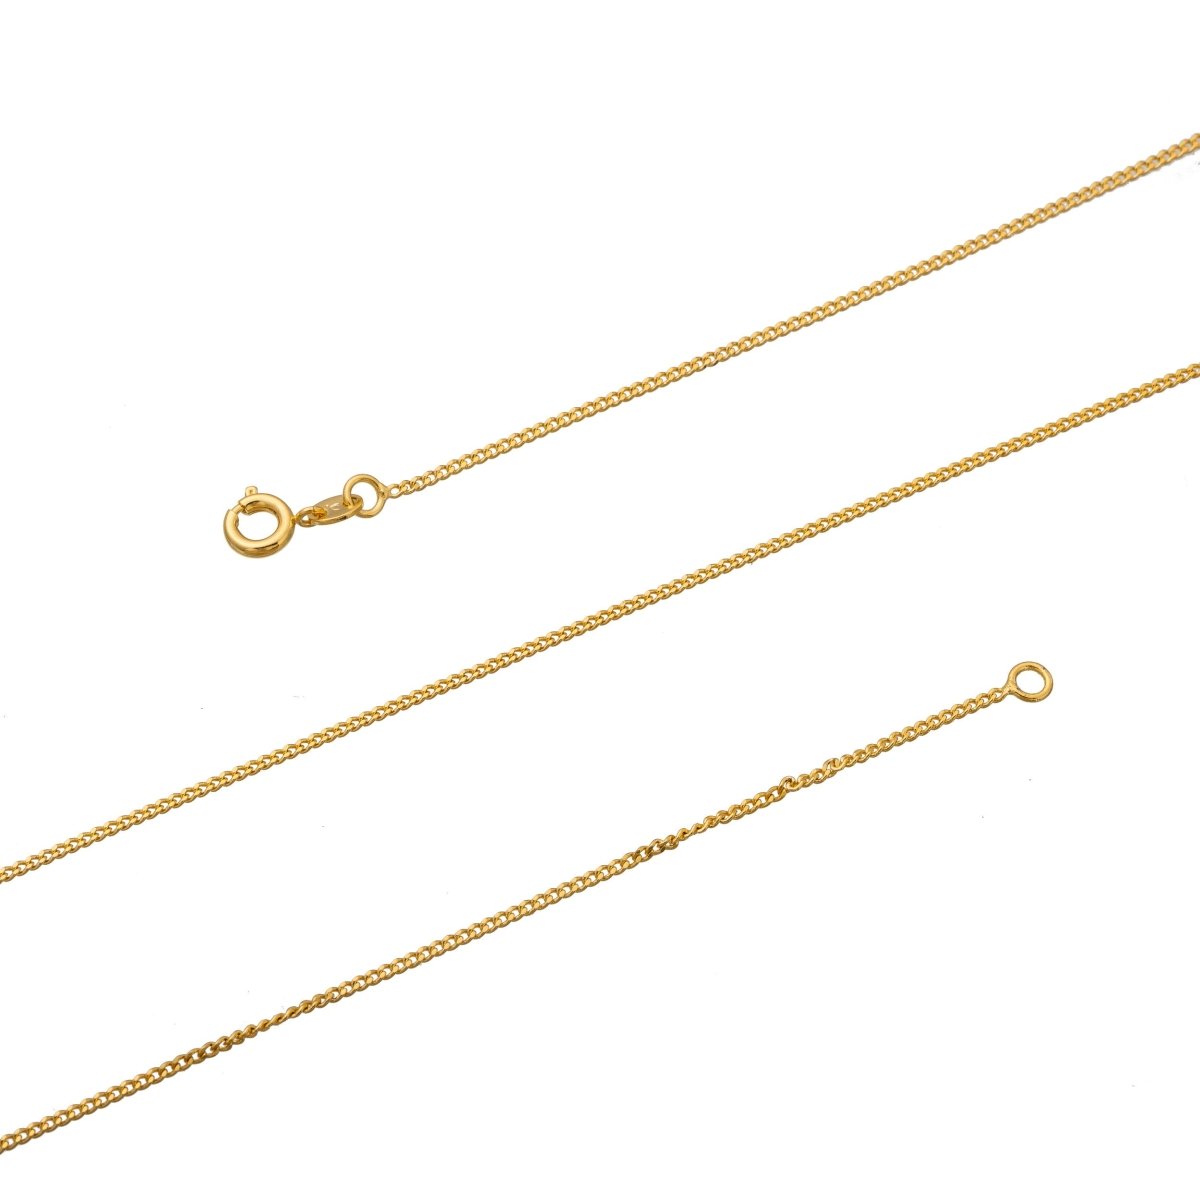 Dainty 1.2mm Curb Chain Necklace, 24K Gold Filled 17.5 Inches Curb Chain Necklace w/ Spring Ring | CN-196 Clearance Pricing - DLUXCA